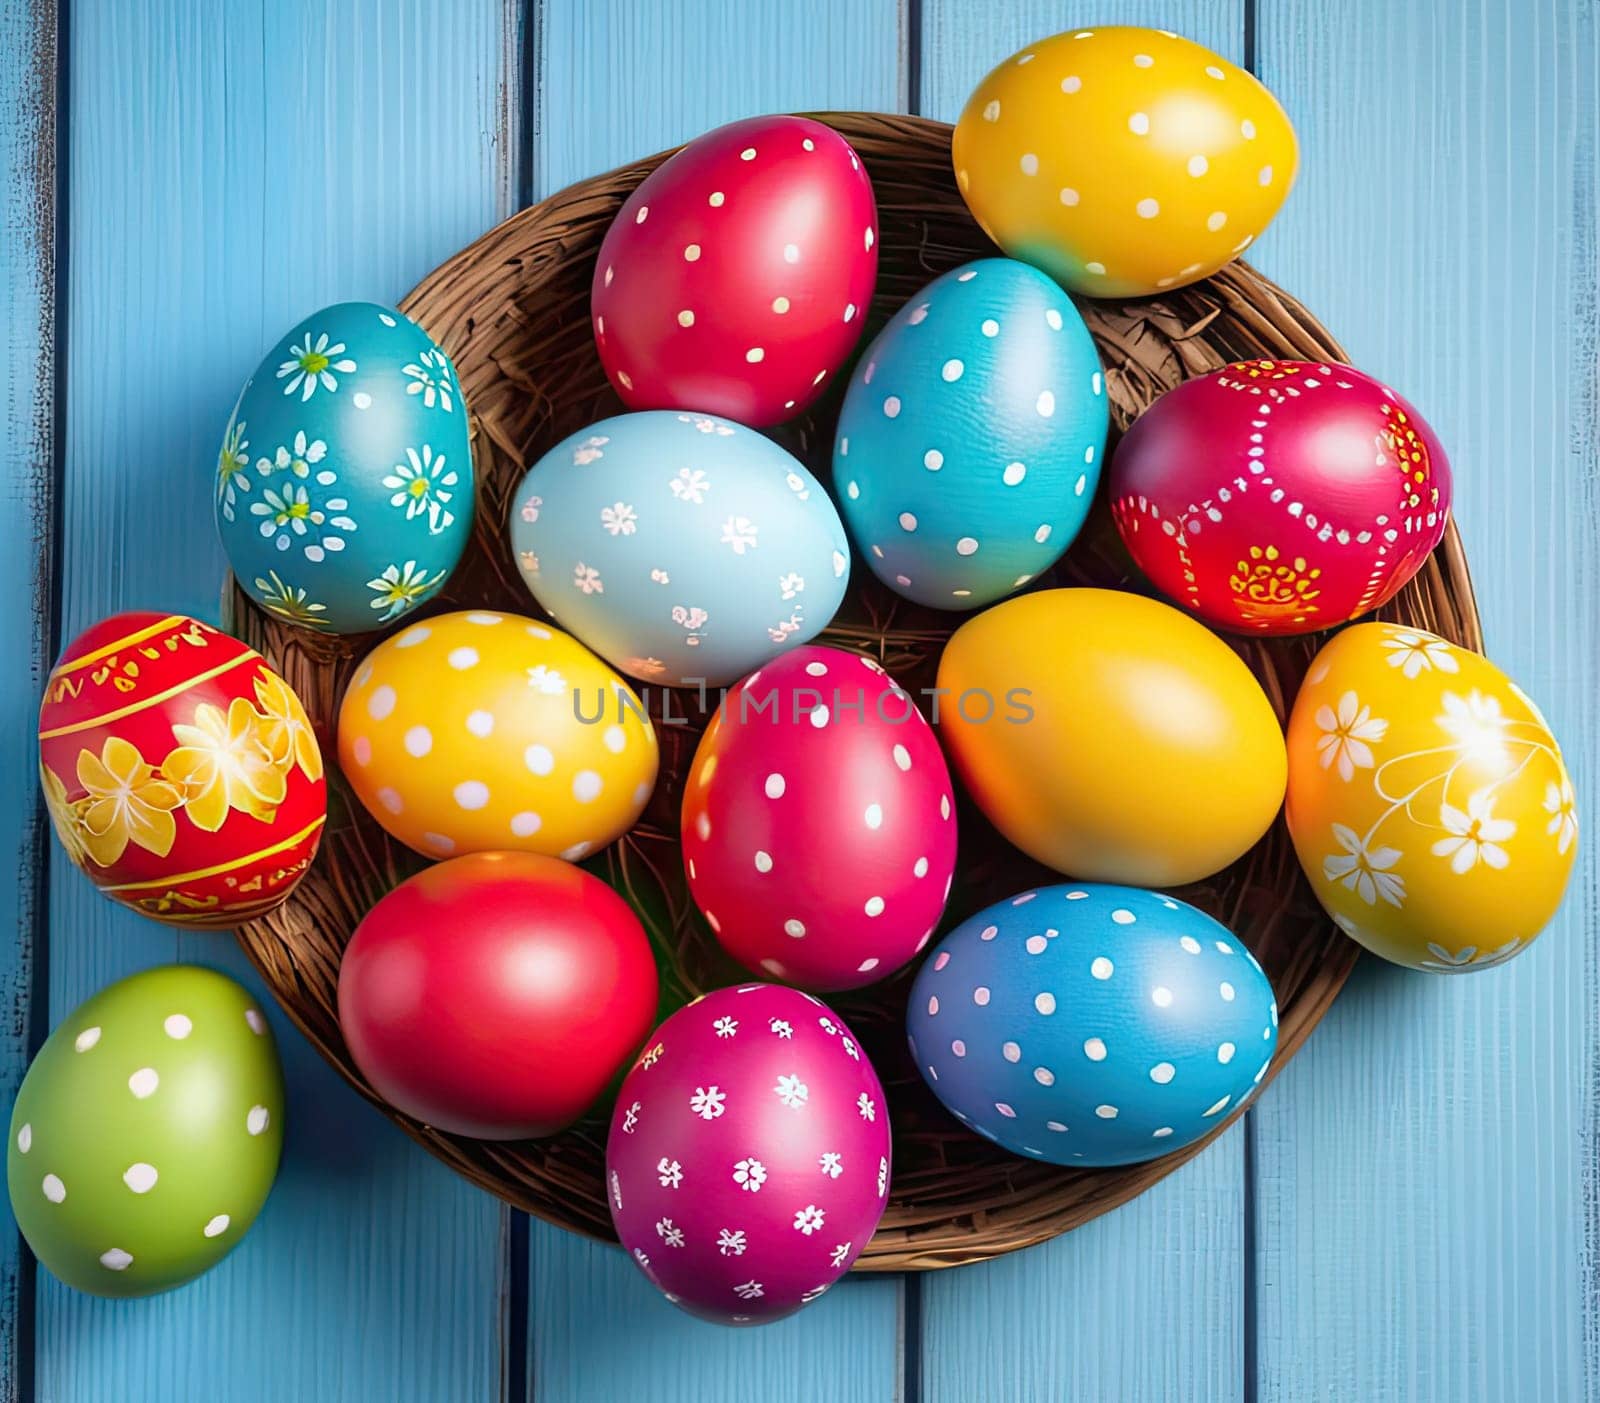 Colorful Easter eggs on blue wooden background.  Dyed Easter eggs